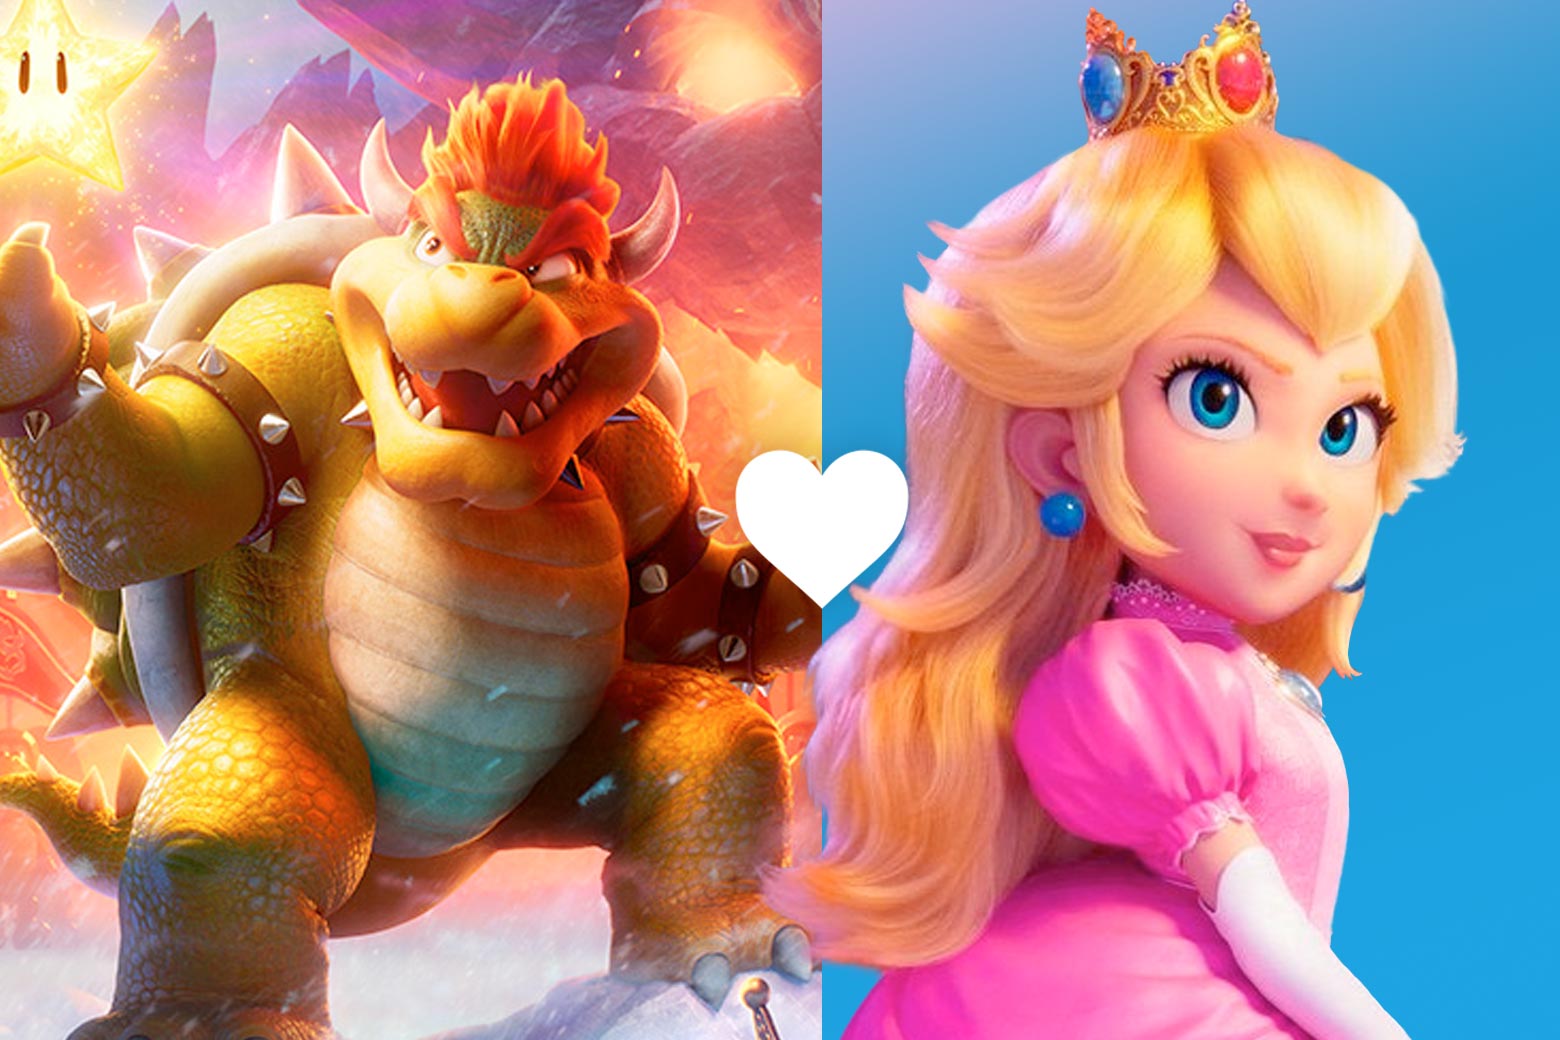 Mario movie: Bowser and Peach's relationship history—and Nintendo's  attempts to revise it.